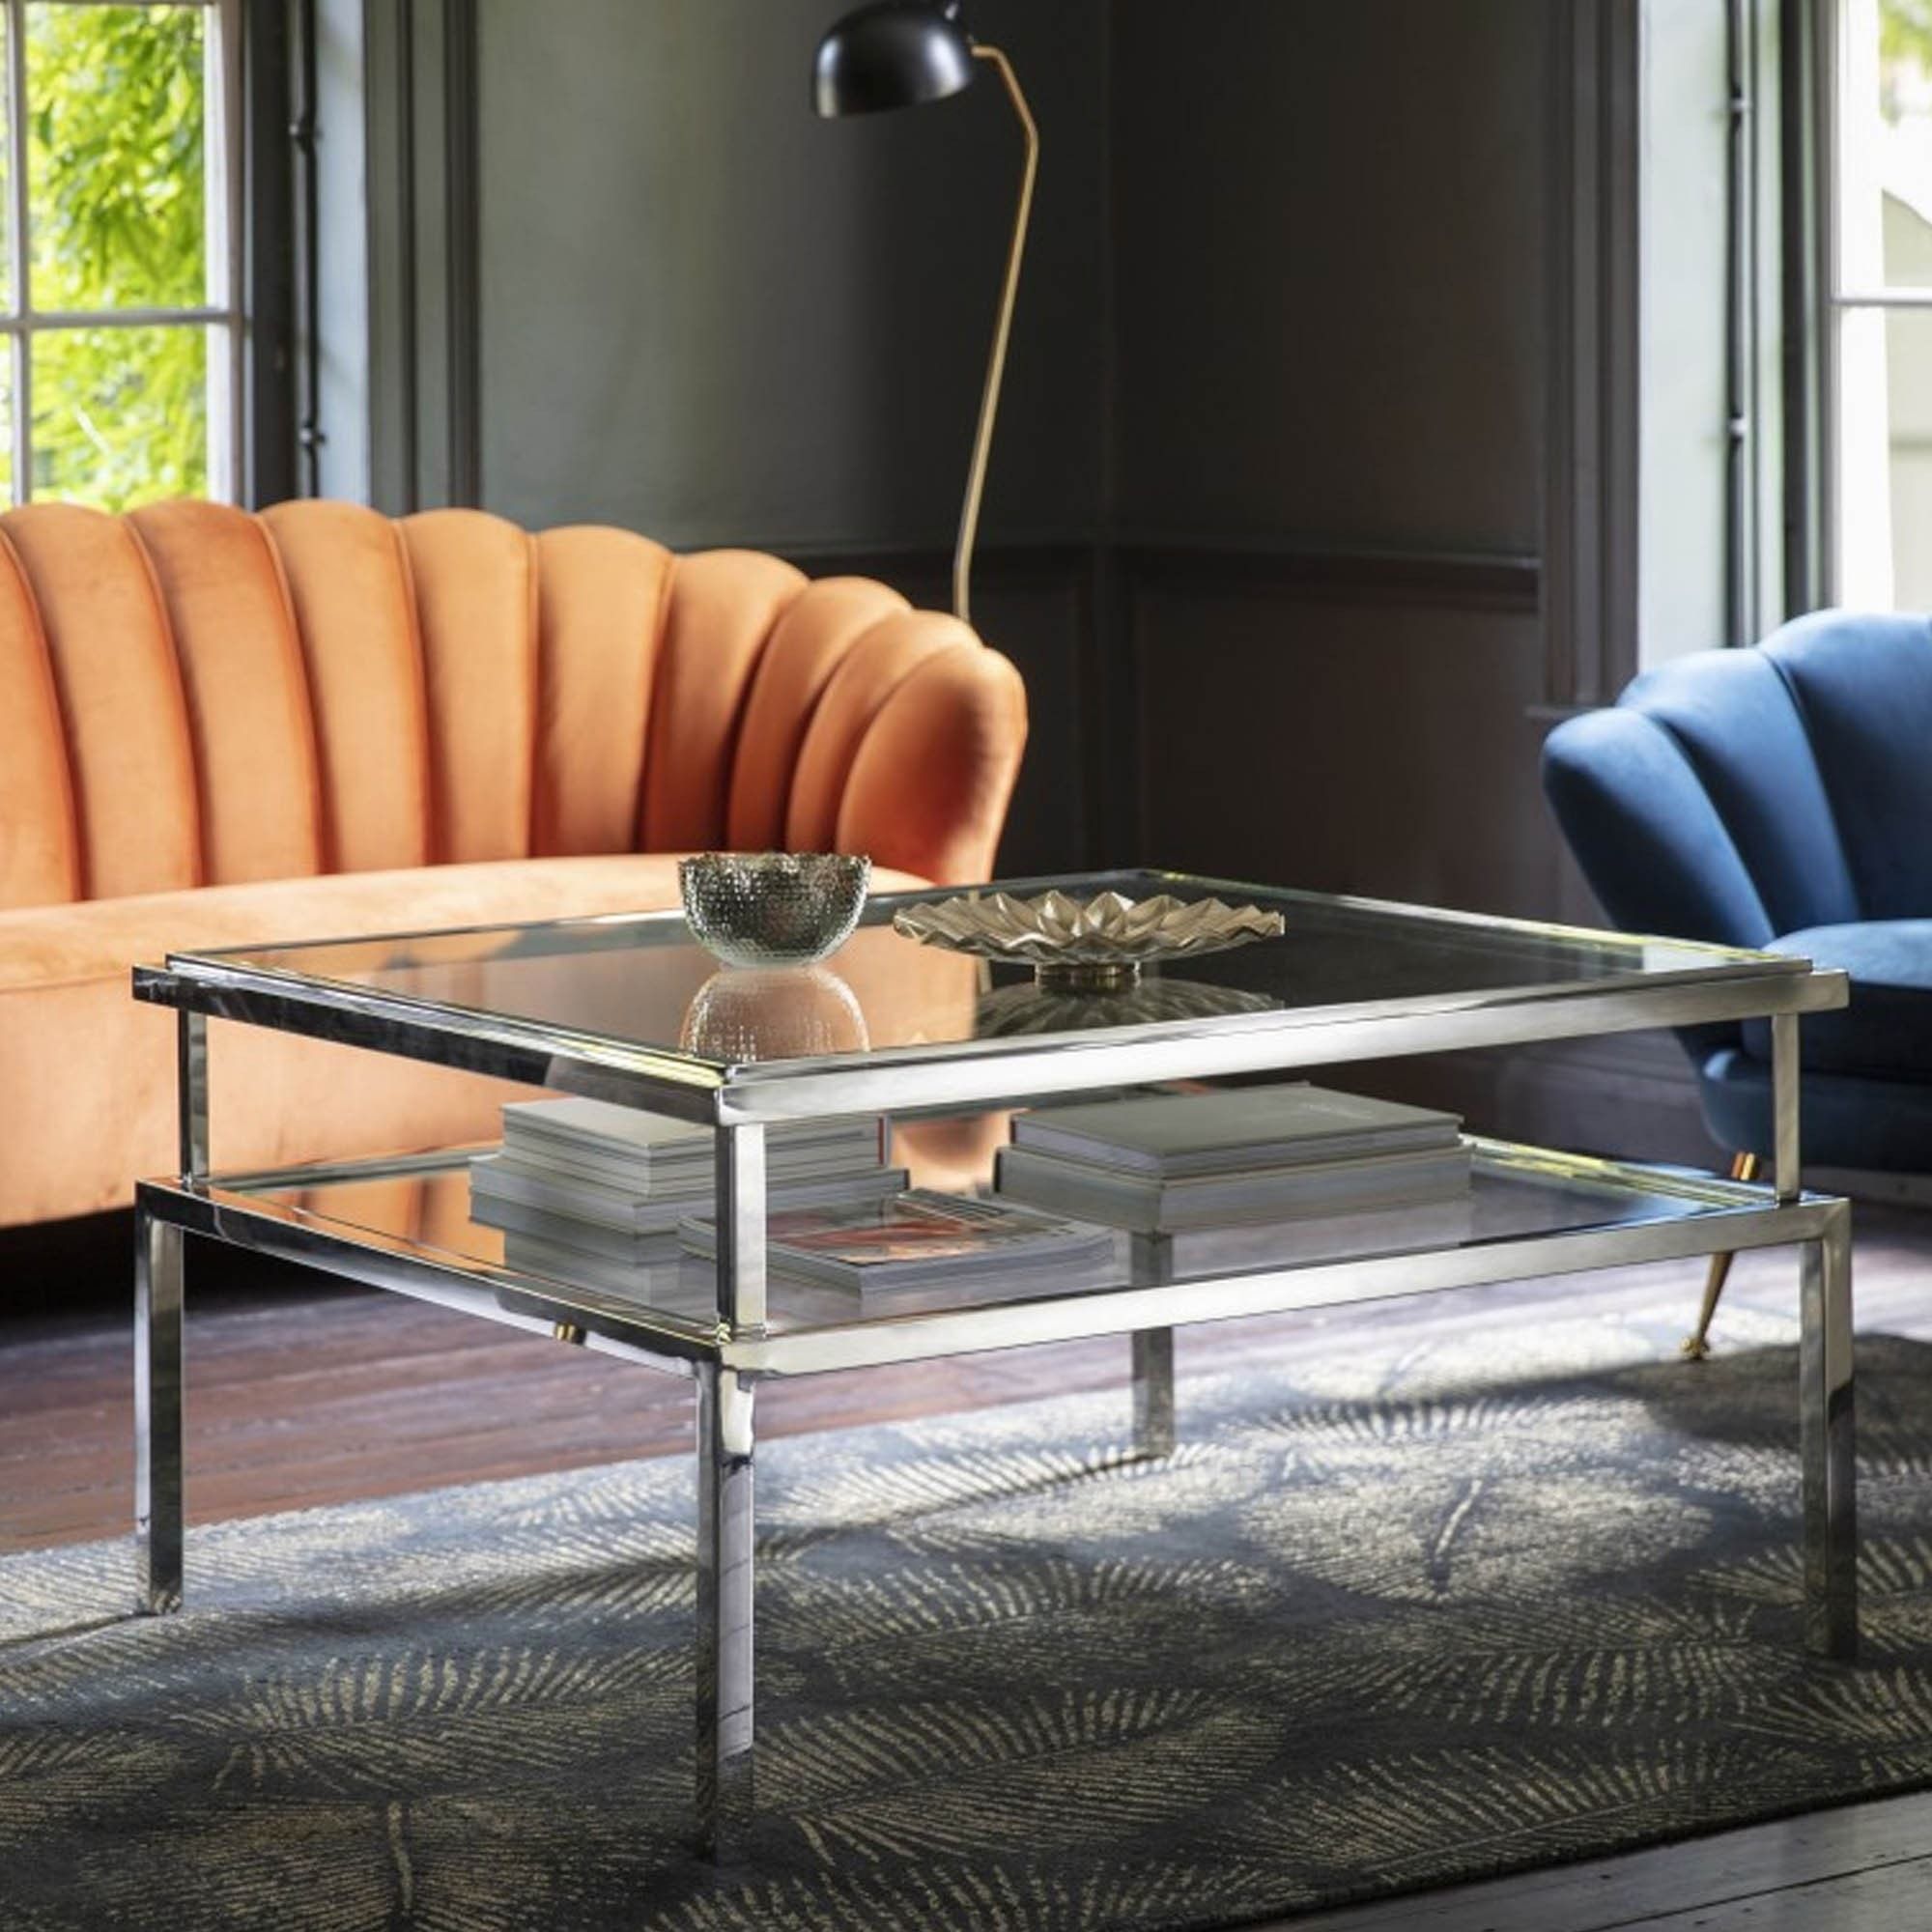 Salerno Coffee Table Silver | Glass Coffee Table | Chrome With Regard To Chrome And Glass Modern Coffee Tables (View 7 of 15)